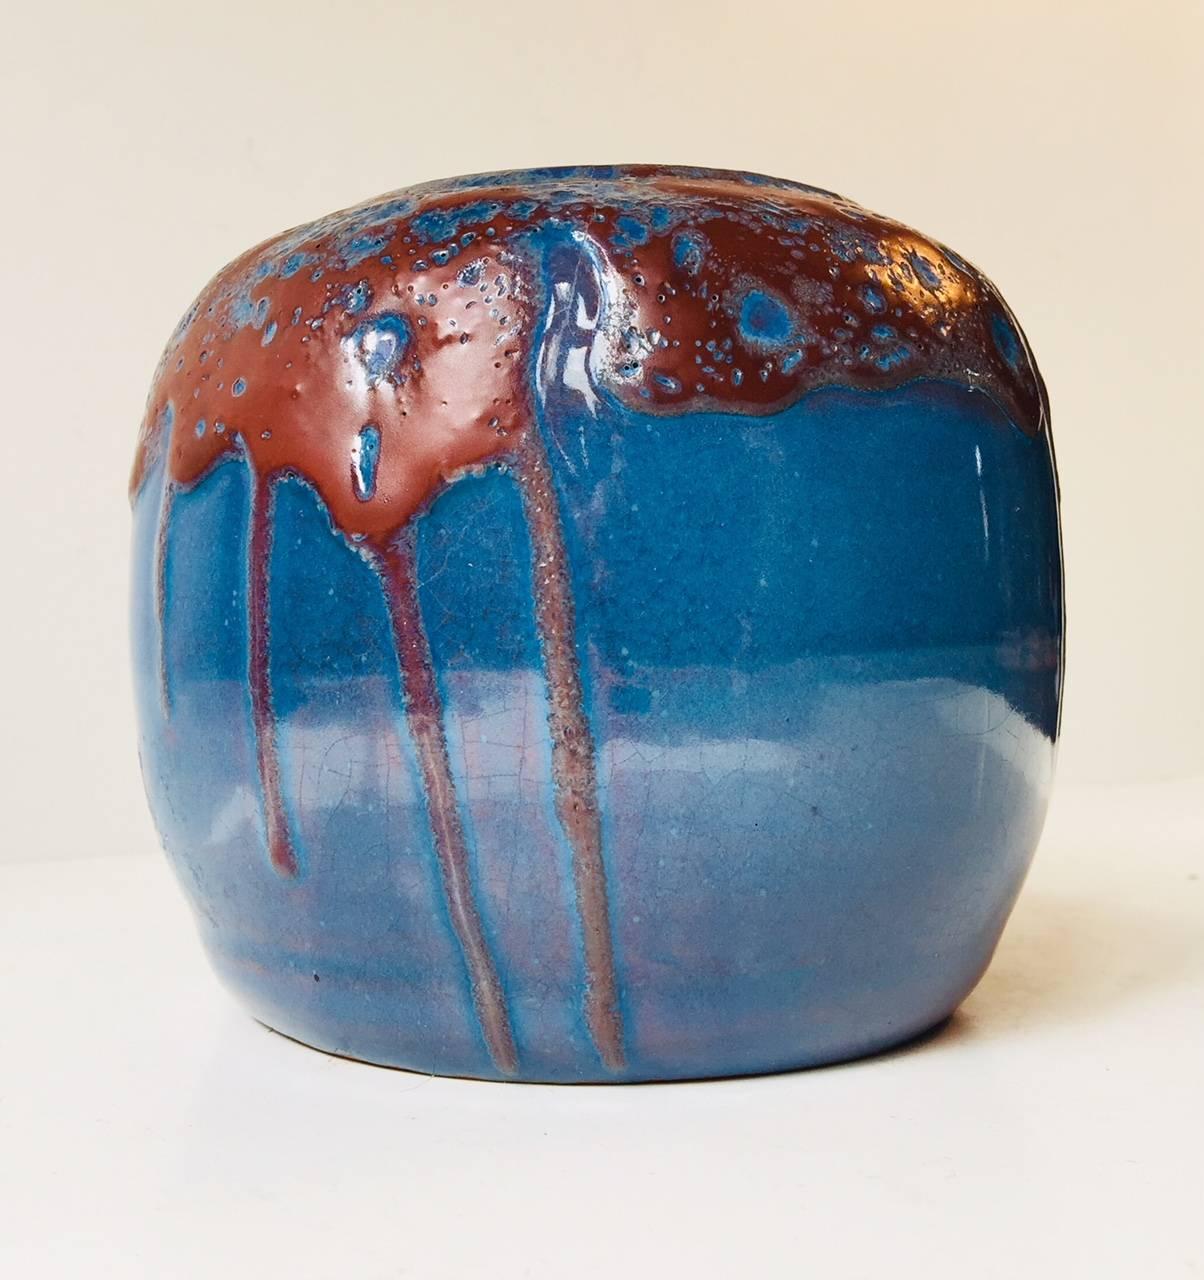 Scandinavian pottery vase decorated in a purple toned blue flambé main-glaze and an over-glaze or drip glaze in Oxblood red. Unidentified Scandinavian ceramist: EHP and its dated 1936. The style of this piece is reminiscent of Chinese Chien Lung.